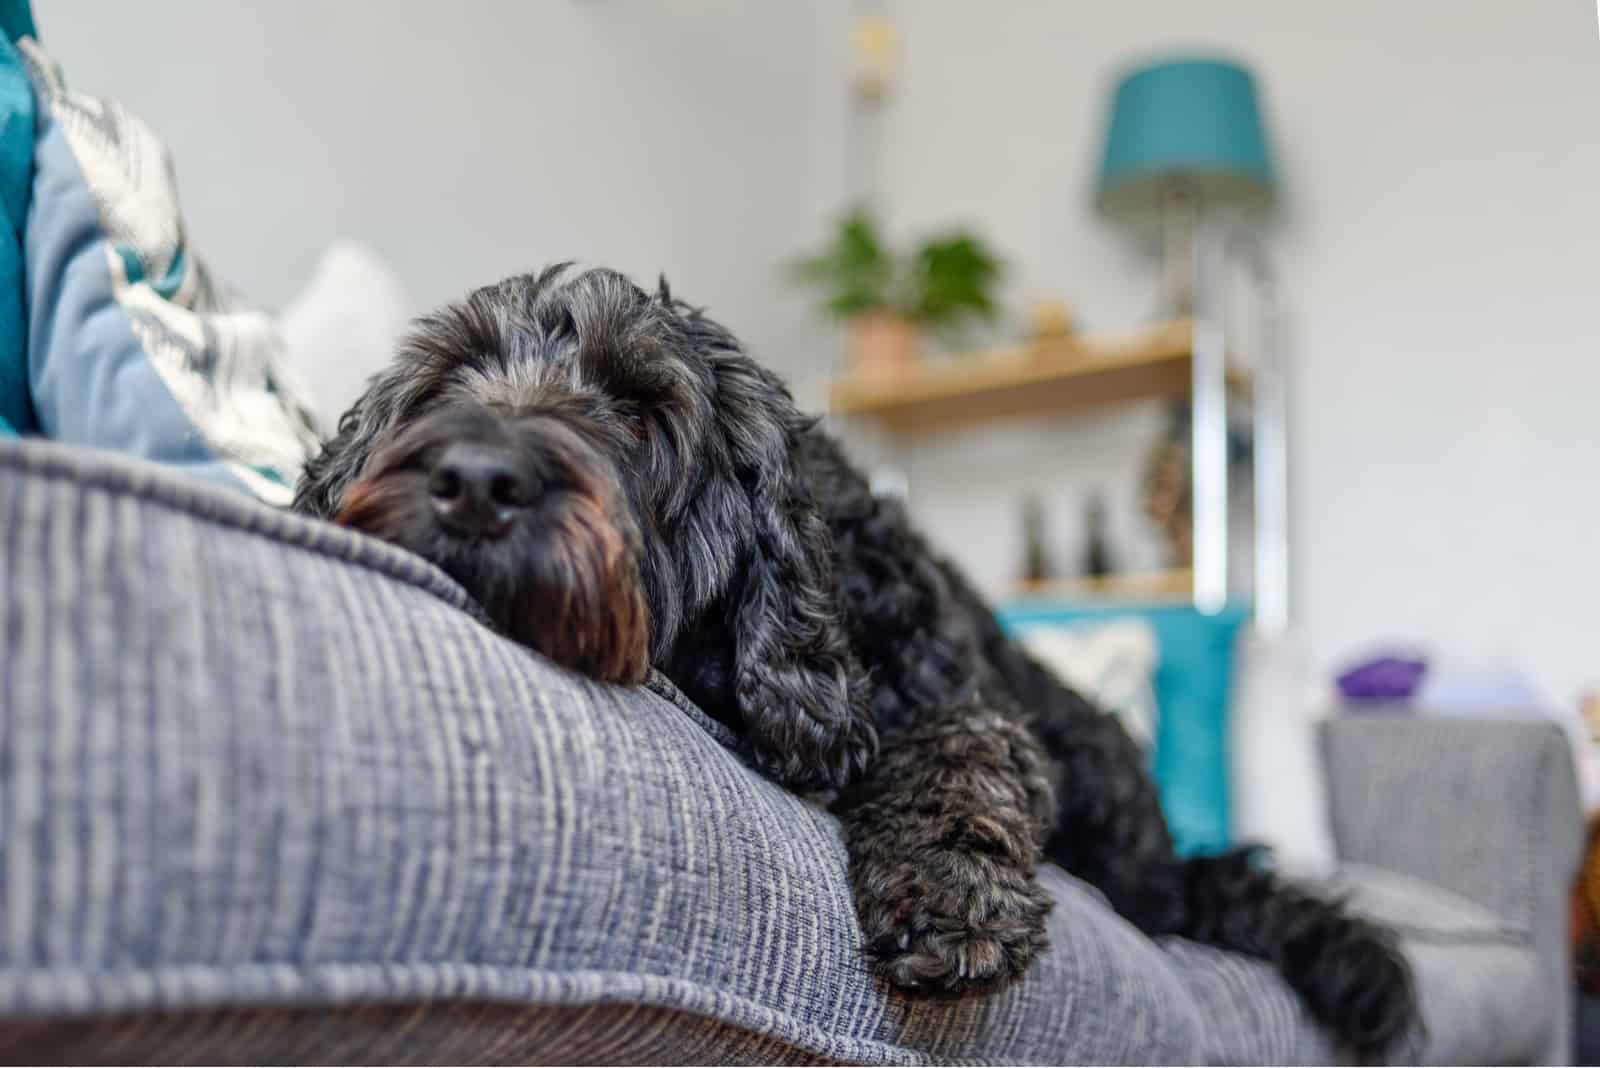 Black Cockapoo Dog relaxing on a couch